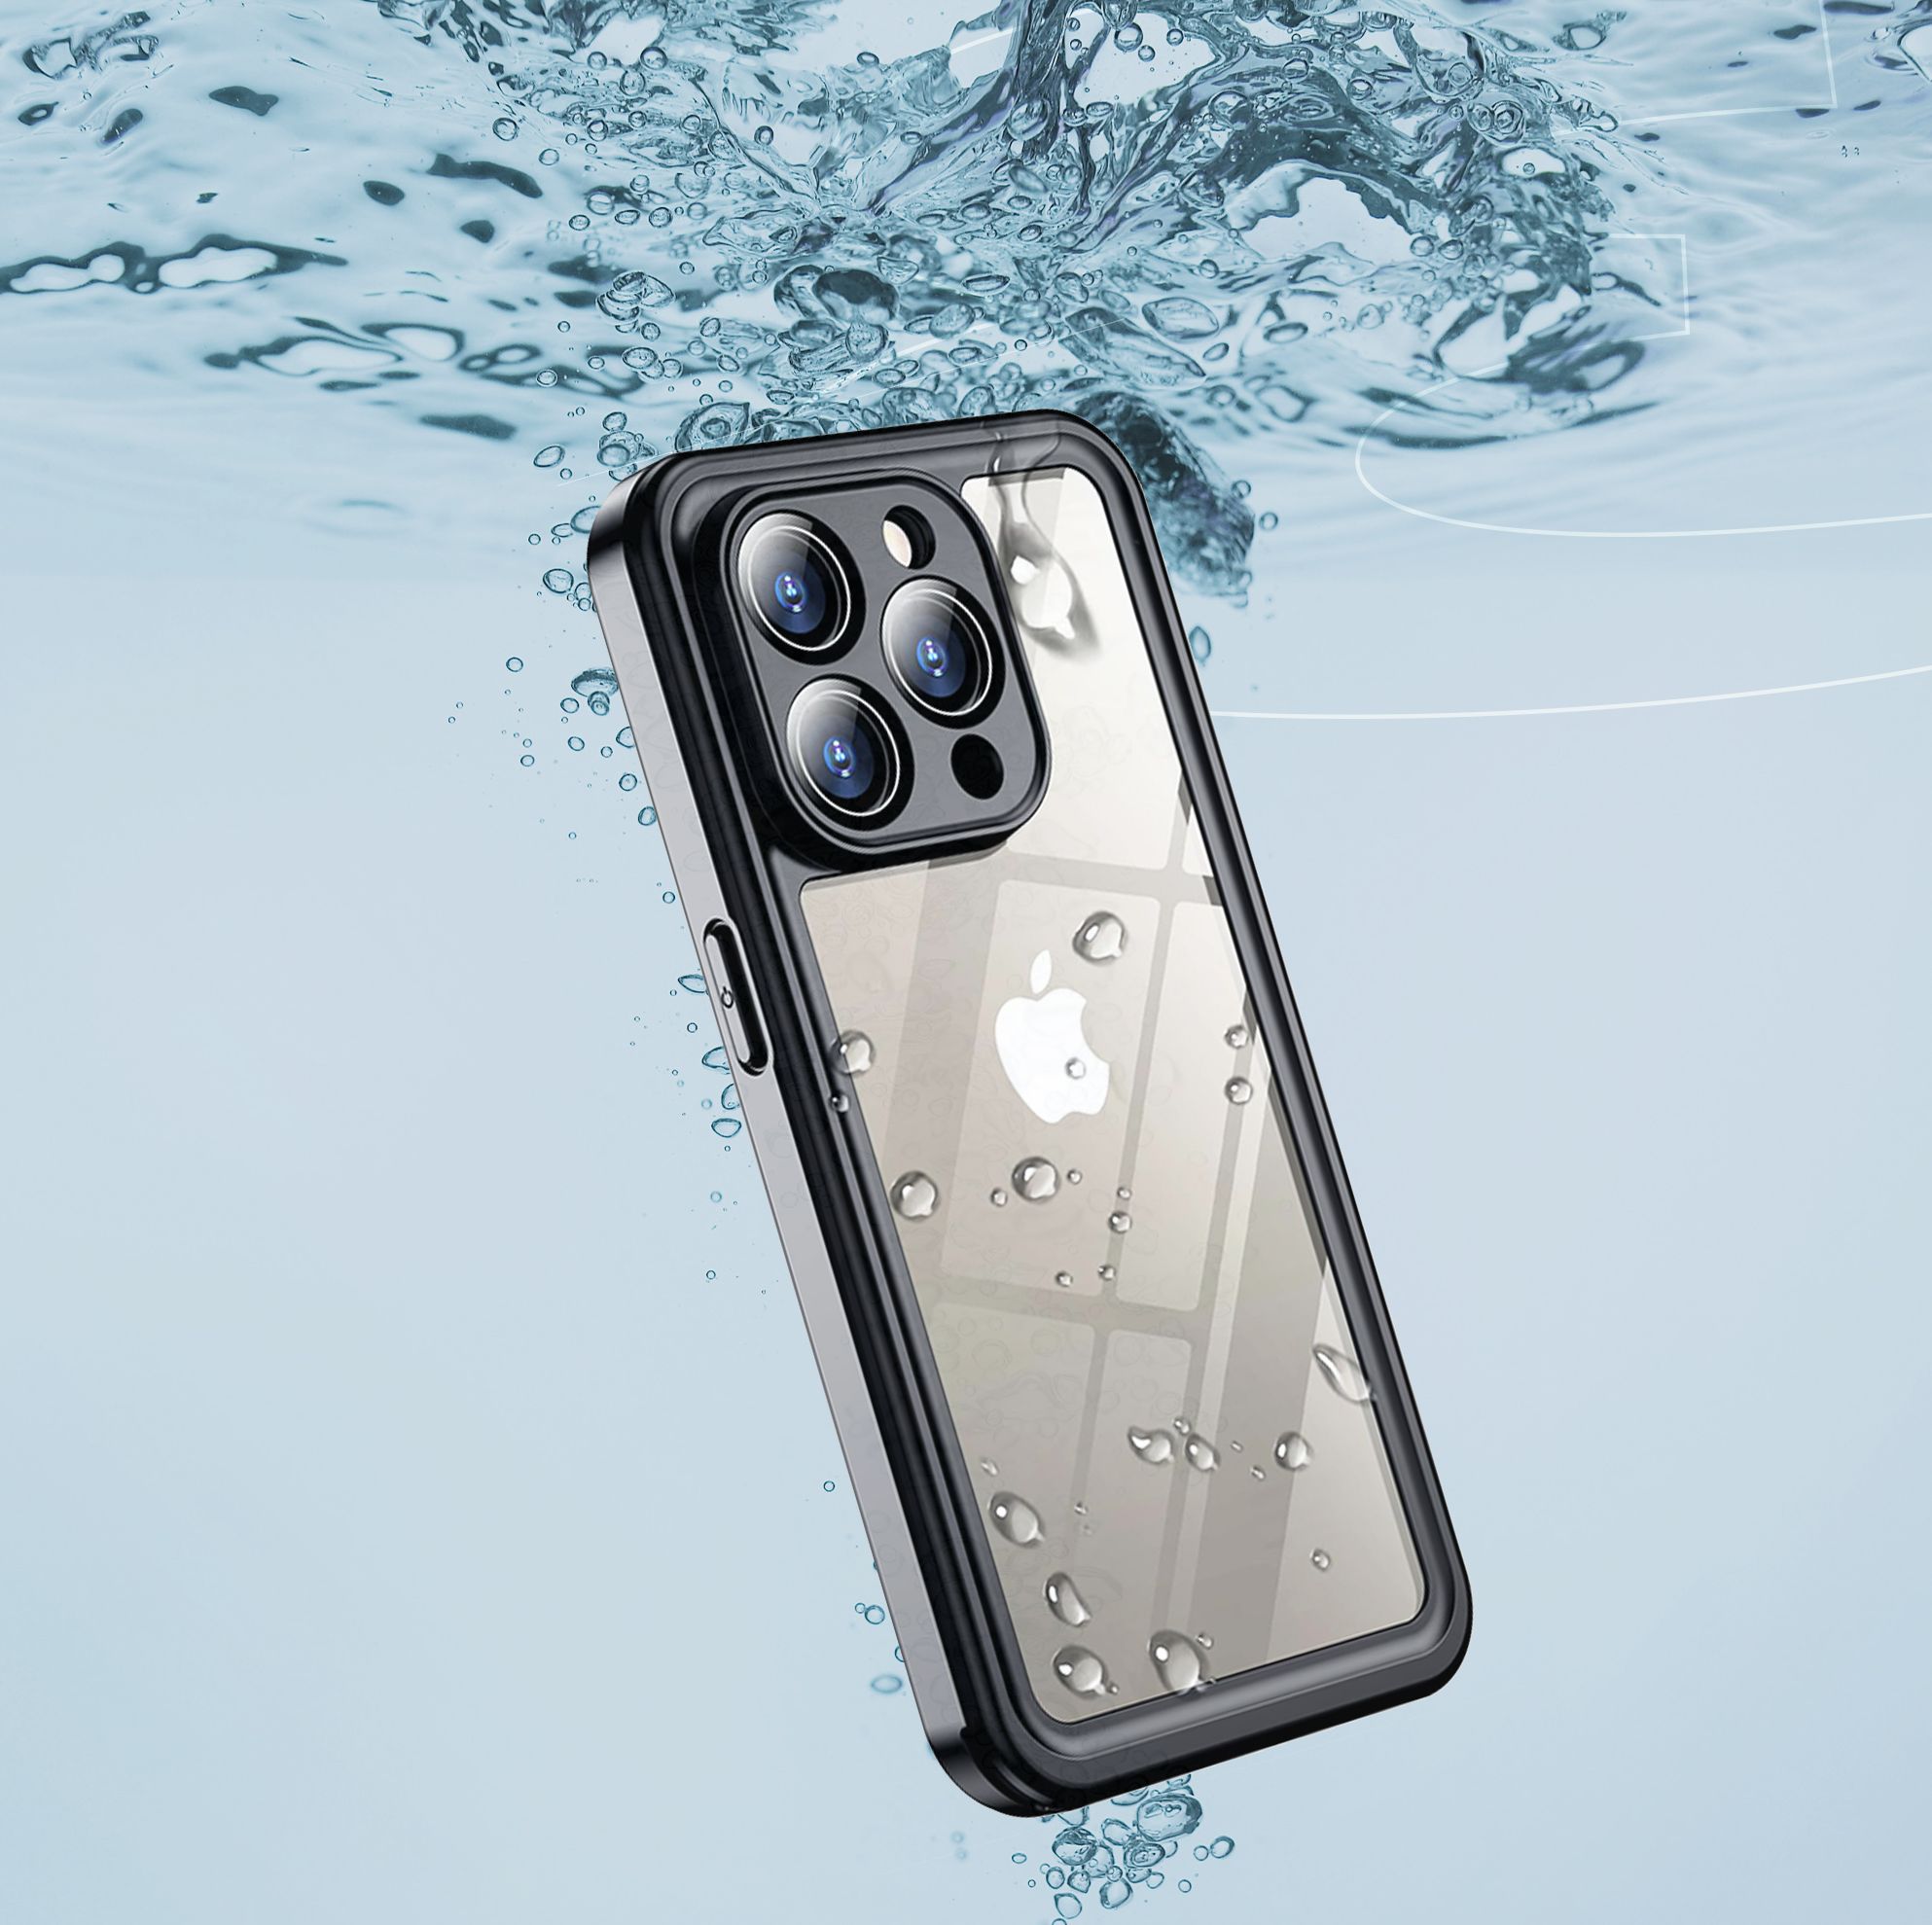 6 Waterproof Phone Cases That'll Keep Your Device Safe